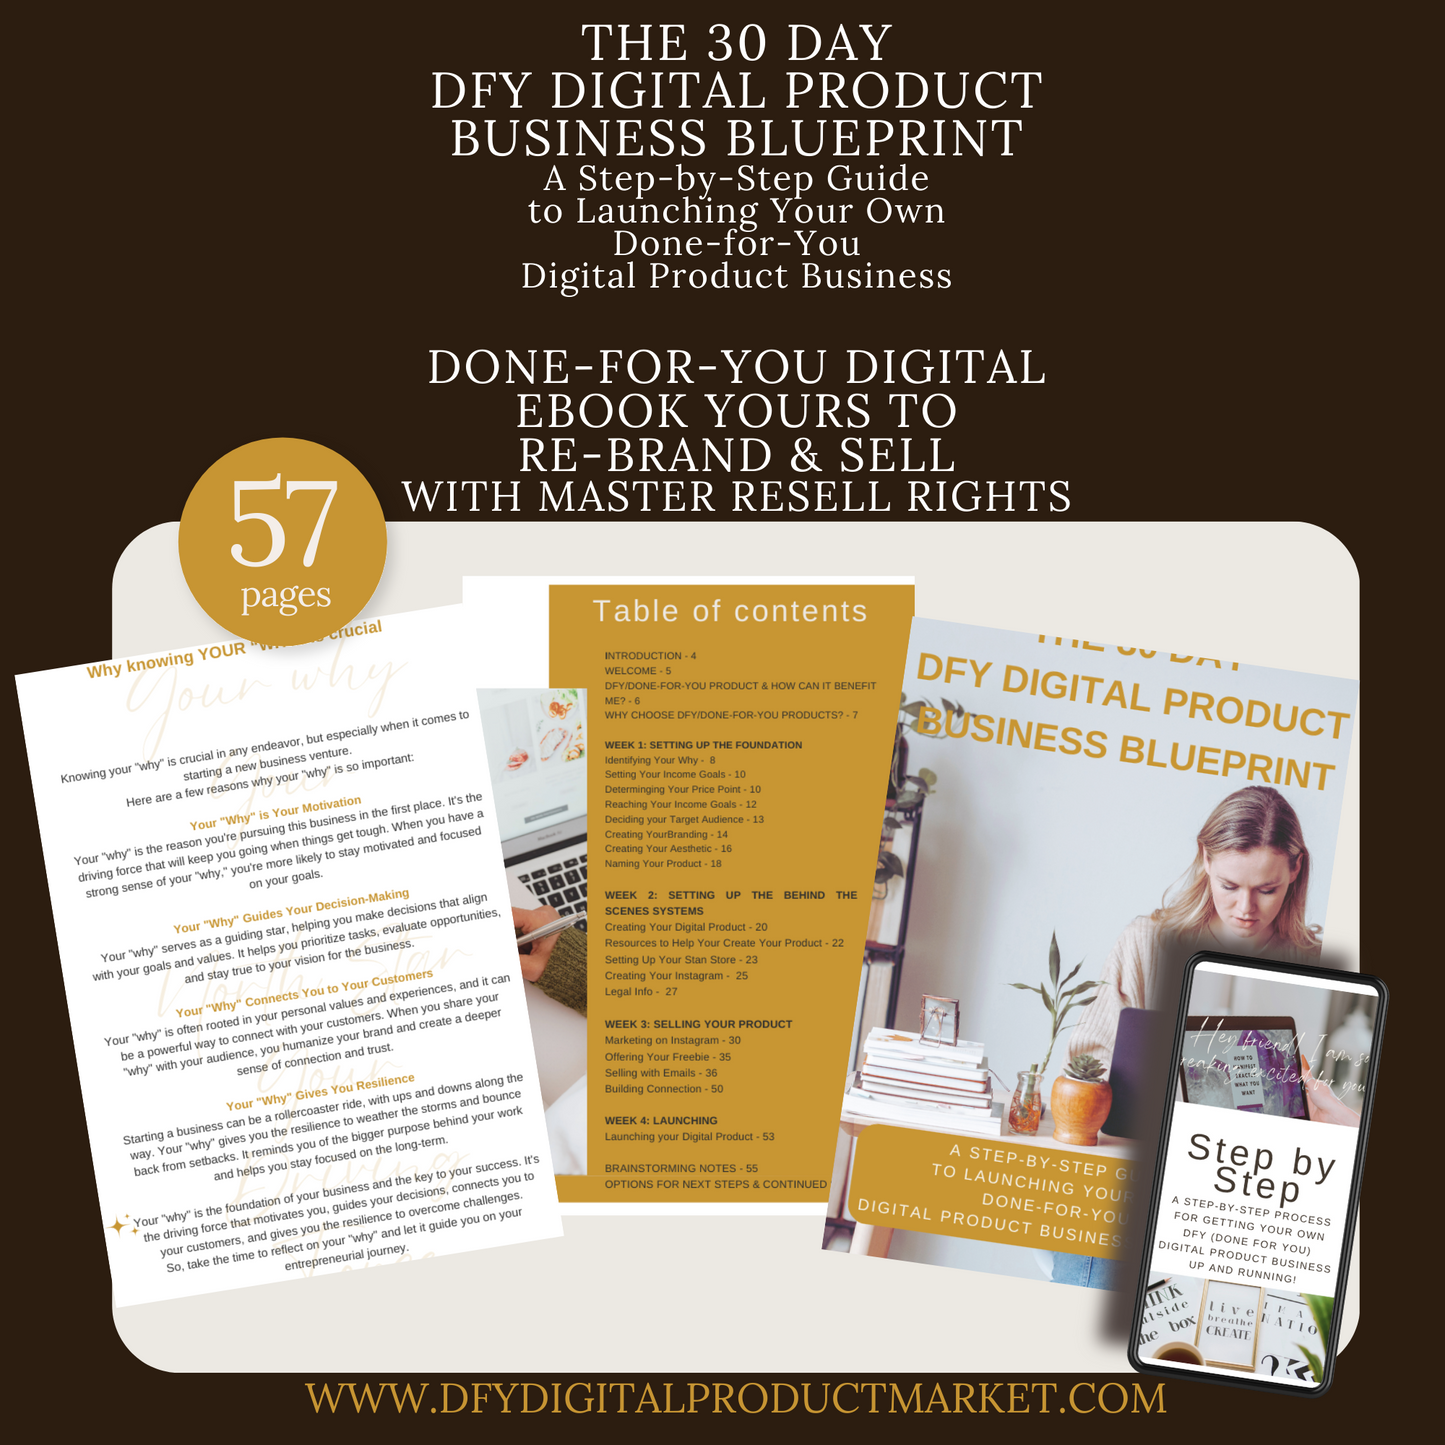 The 30 day DFY Digital Product Business Blueprint - Launch Your DFY Digital Business In 30 Days